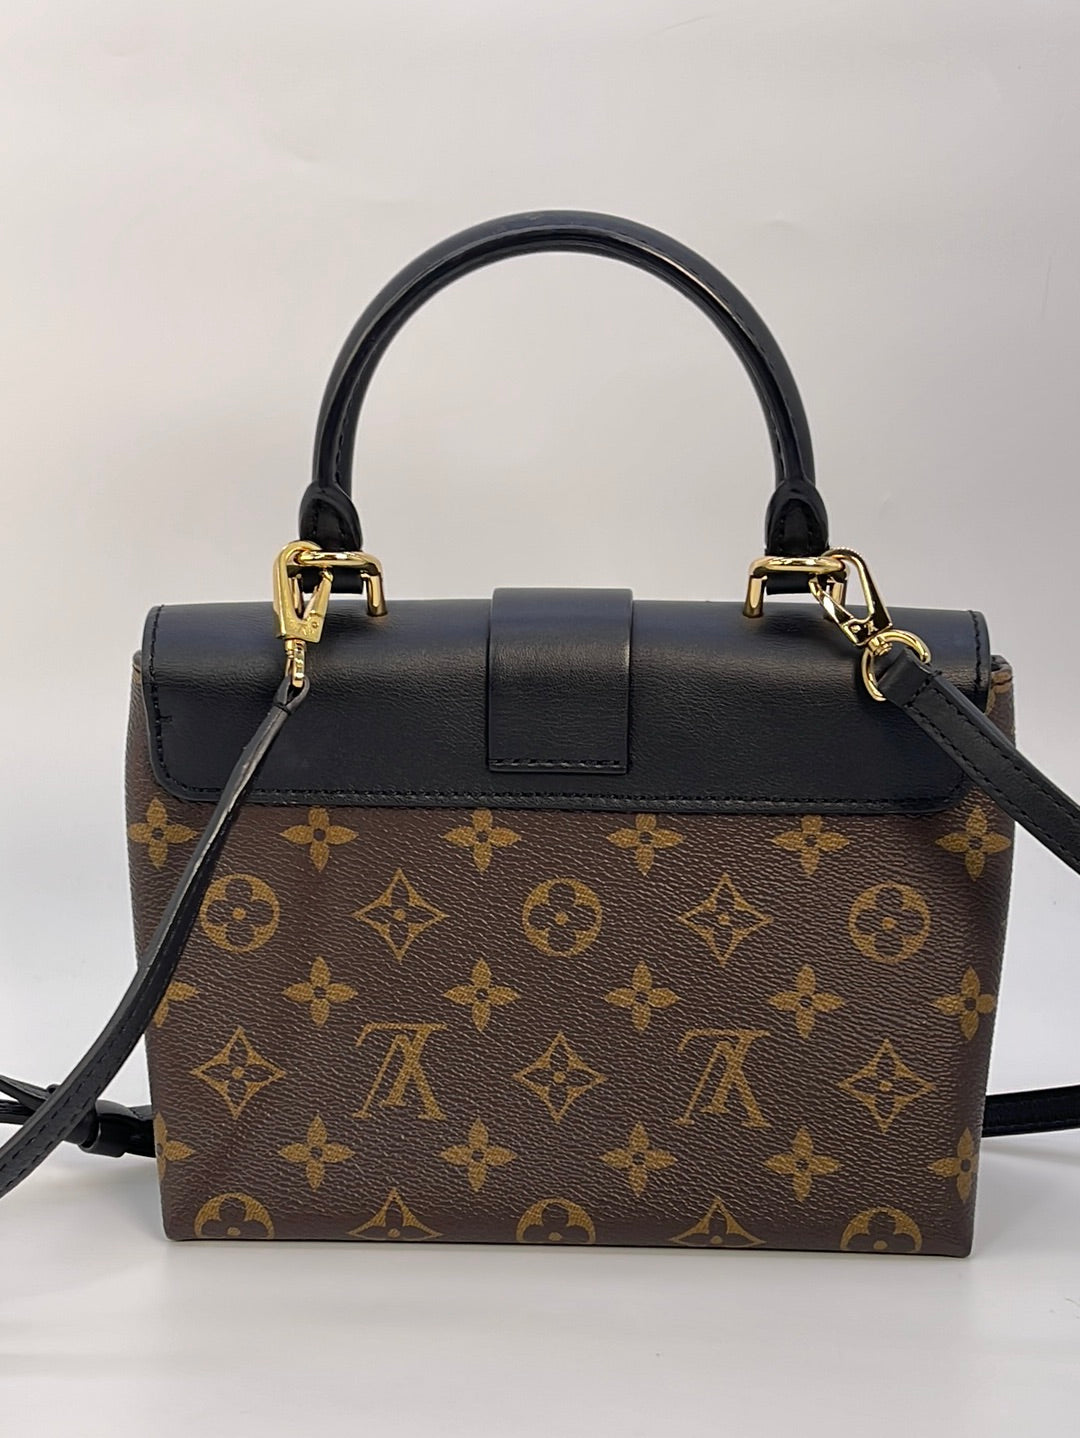 Preloved LOUIS VUITTON Monogram Locky BB Crossbody Bag AA4260 020823 - SOLD AUCTION for $1500